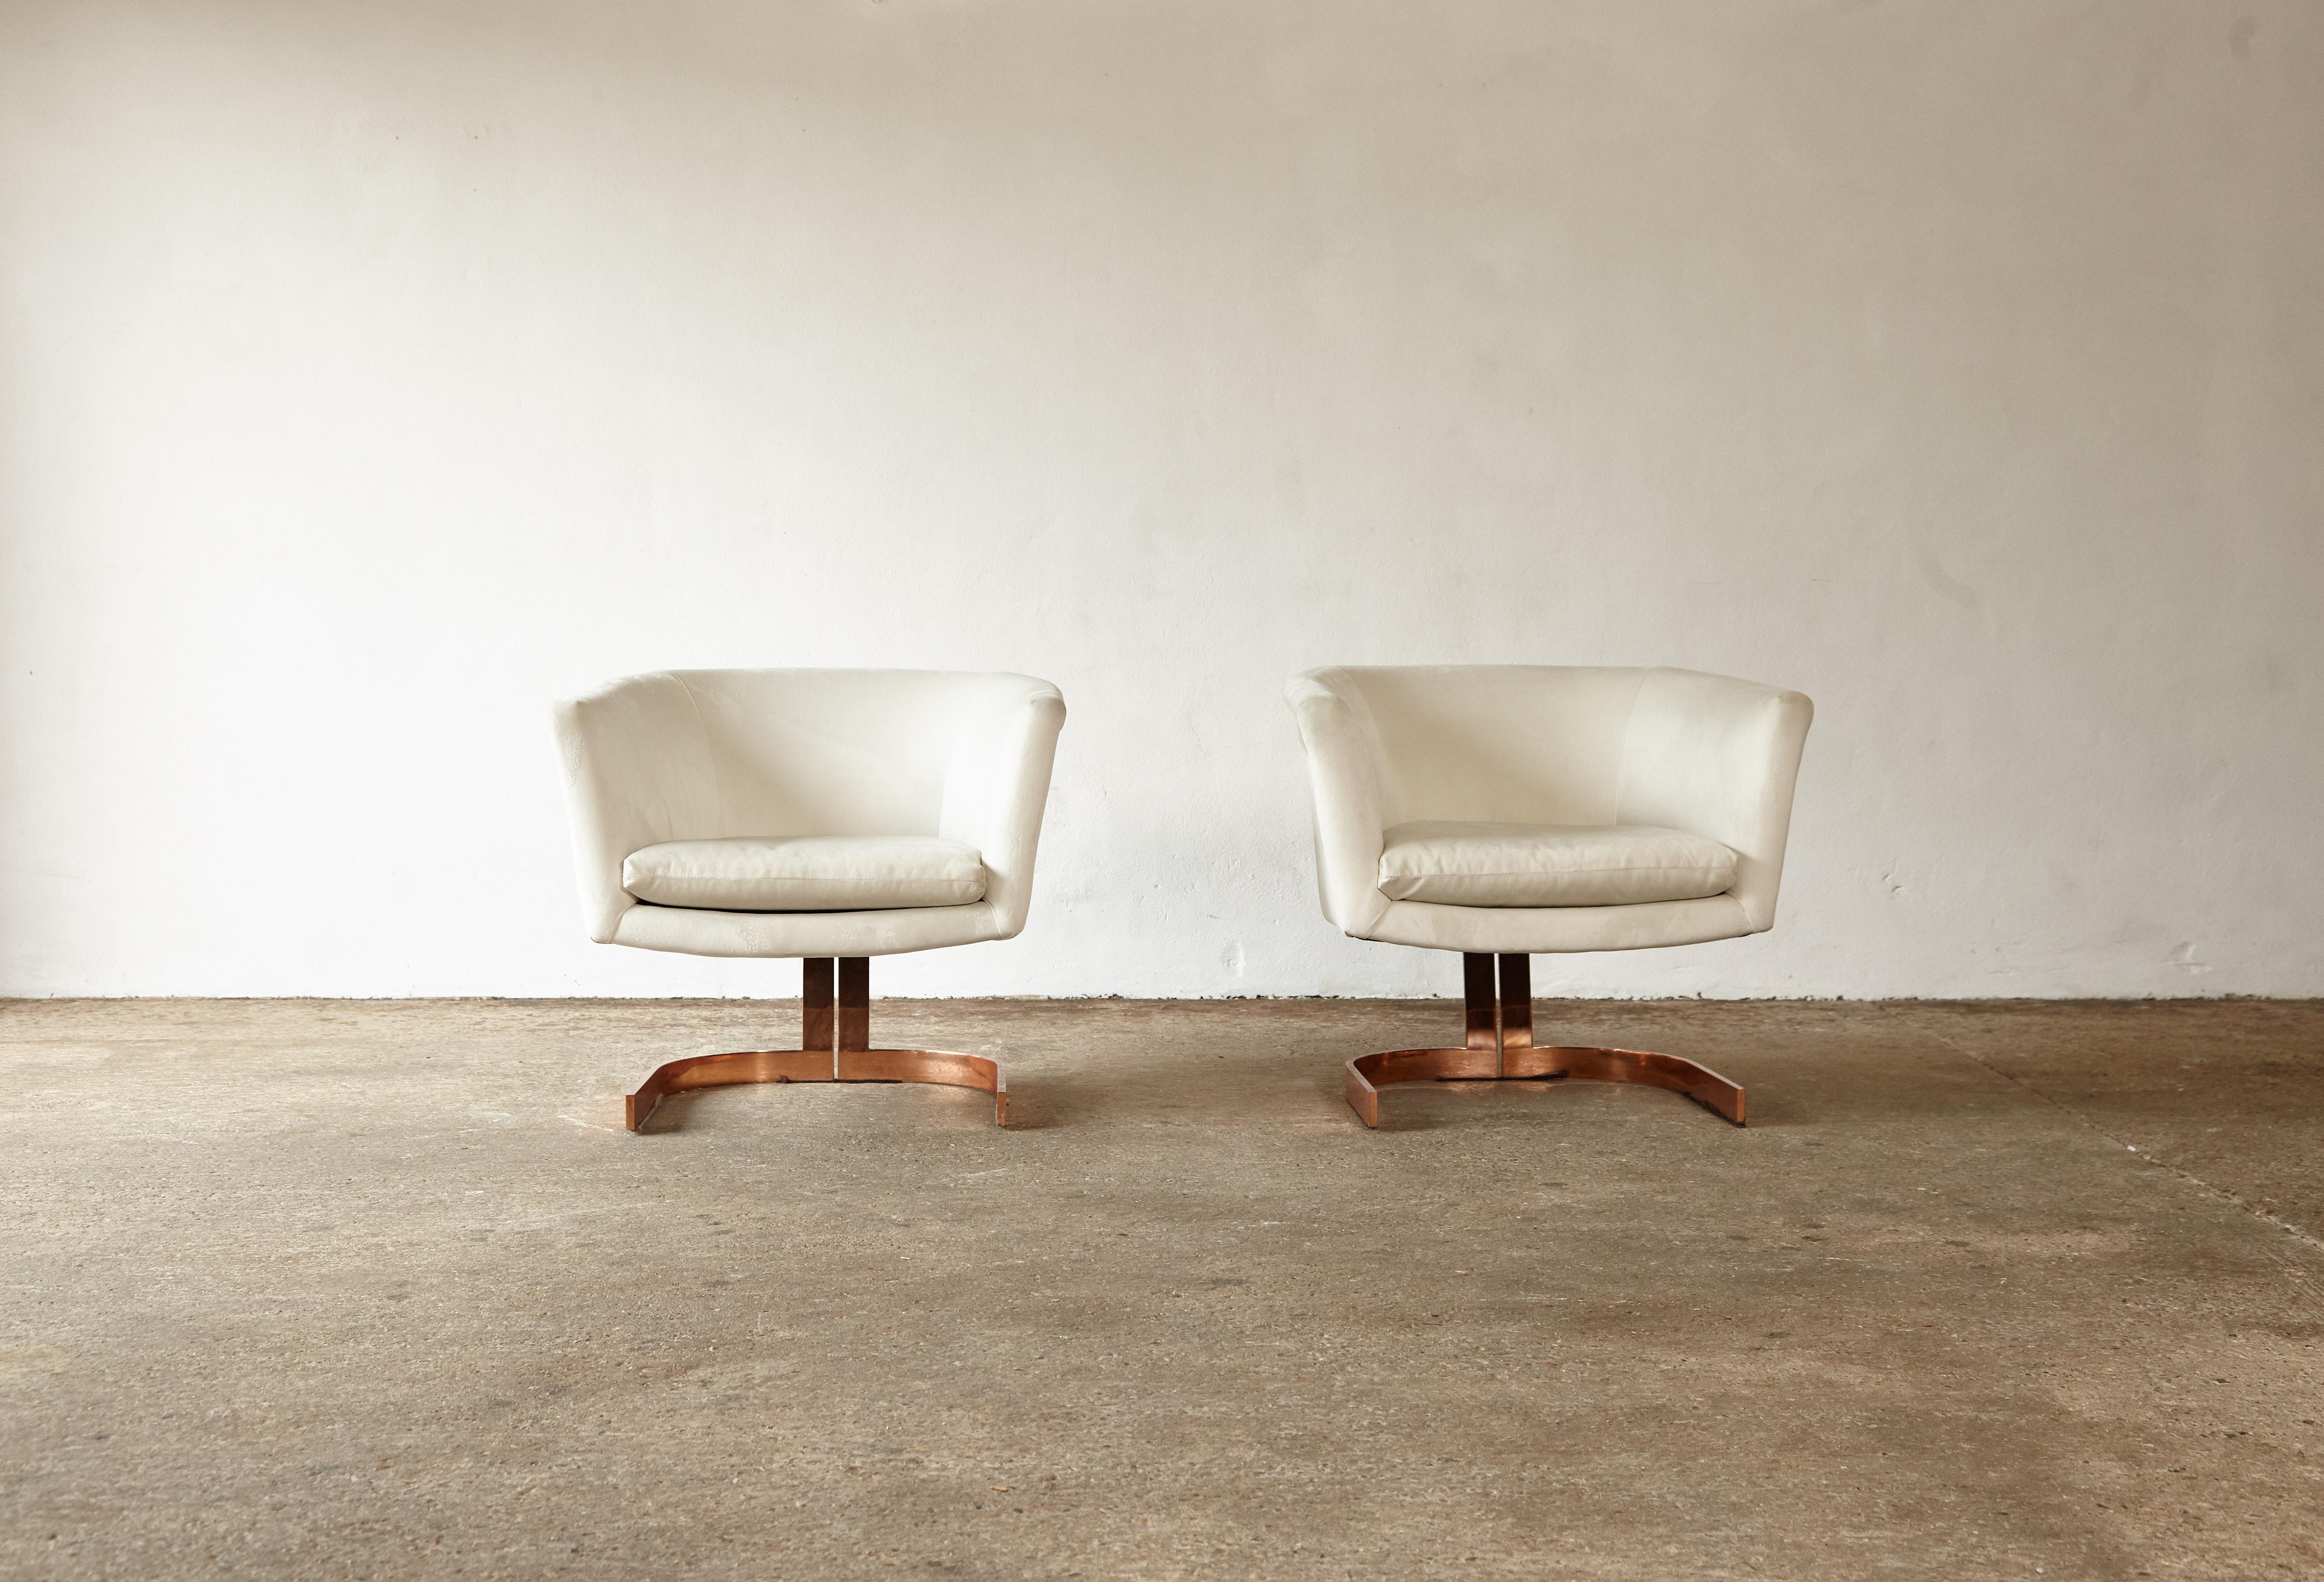 American Pair of Copper Framed Cantilevered Chairs, 1970s / Milo Baughman Style, USA